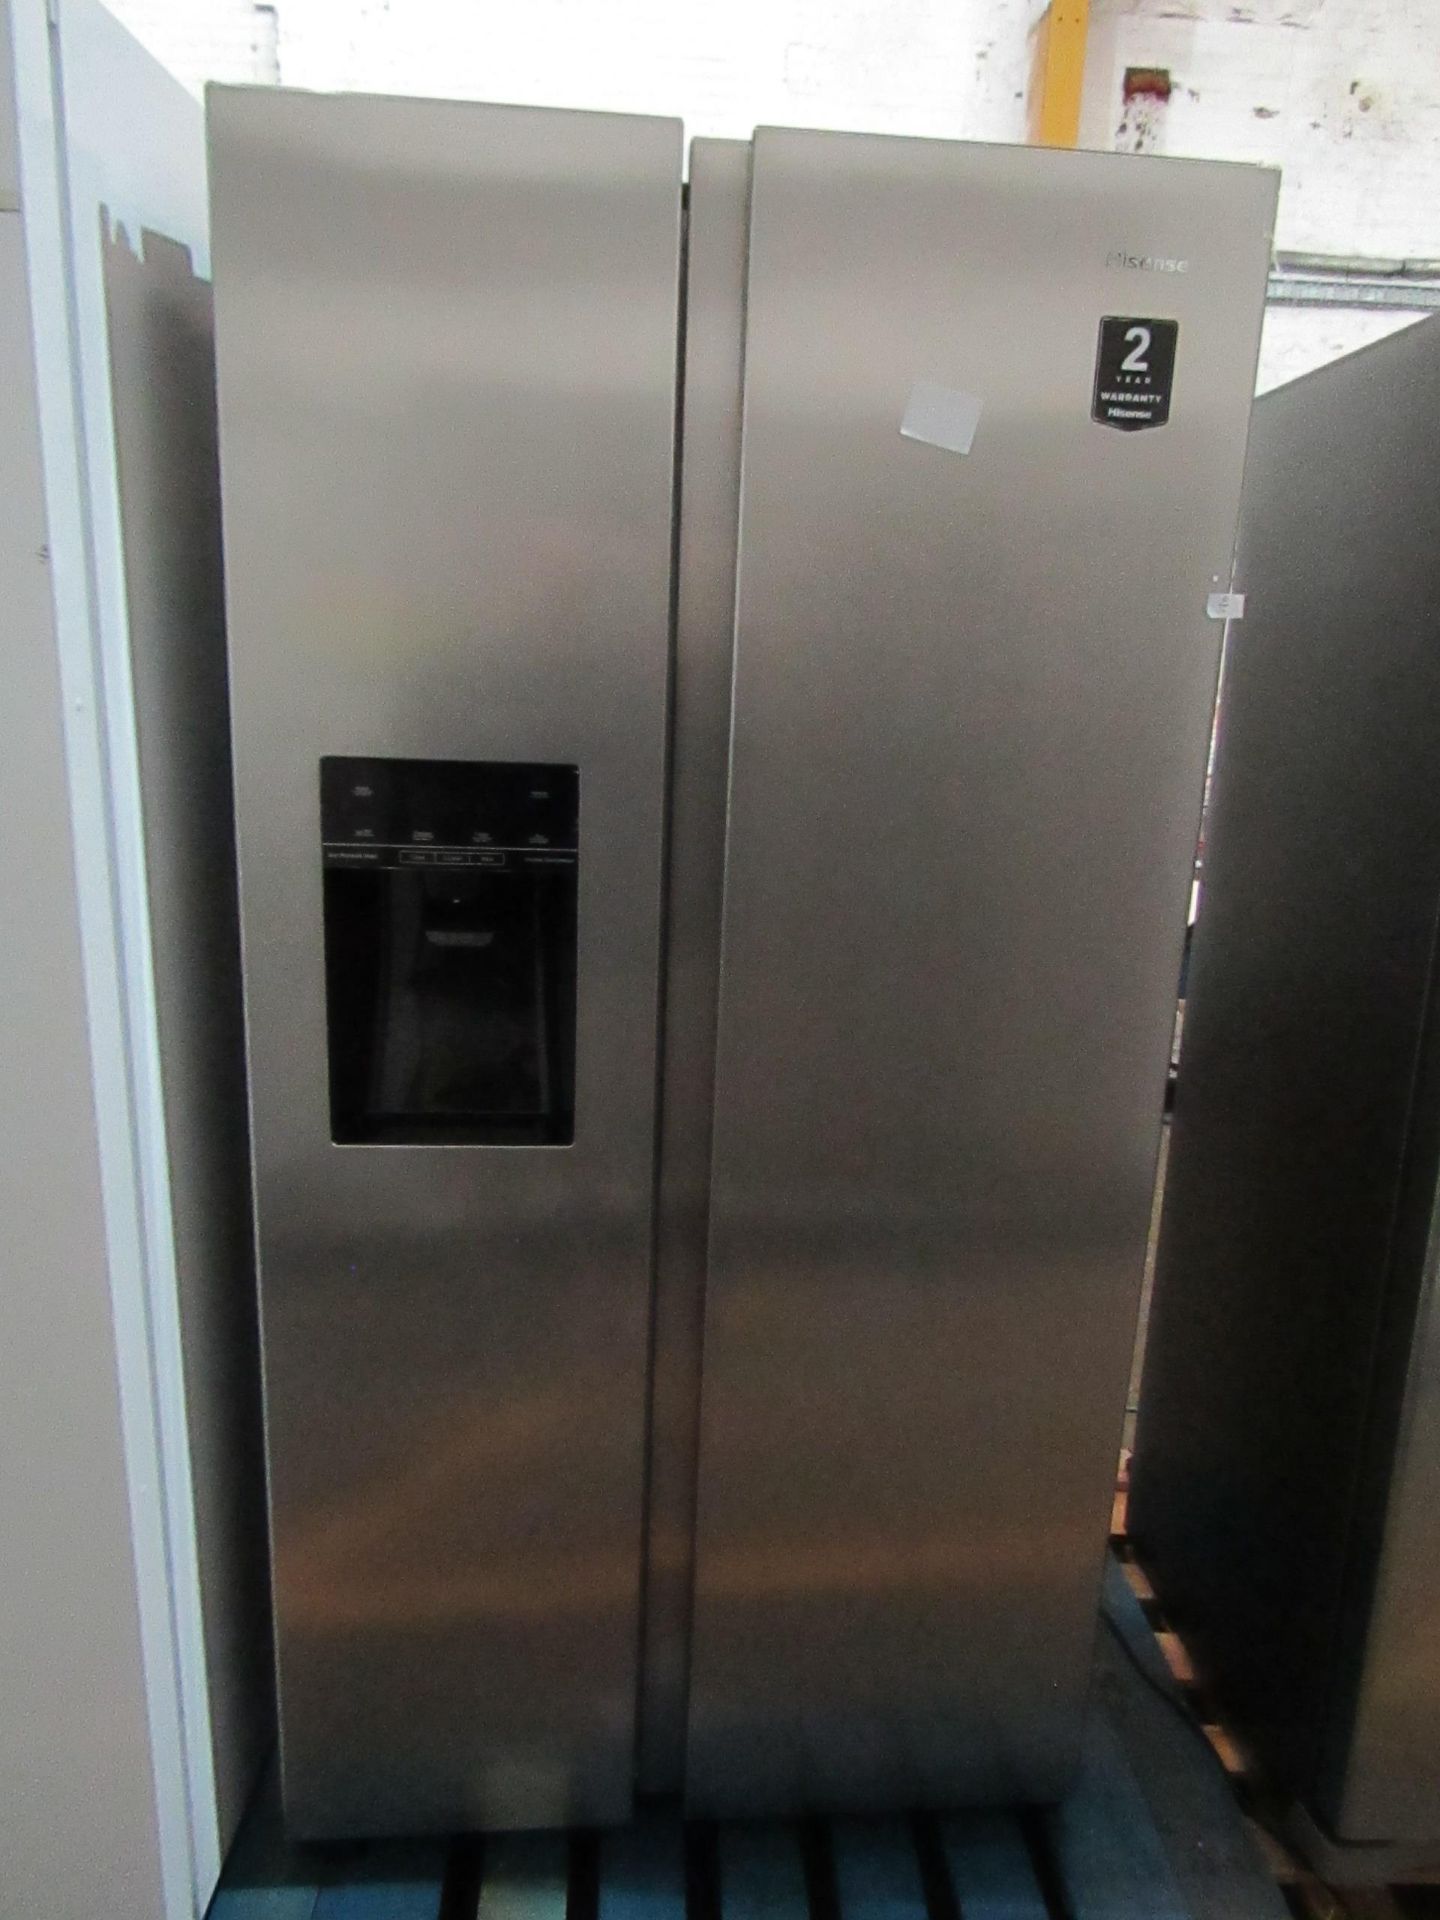 Hisense American style fridge freezer with water dispenser, tested working for cold ness, water - Image 3 of 3